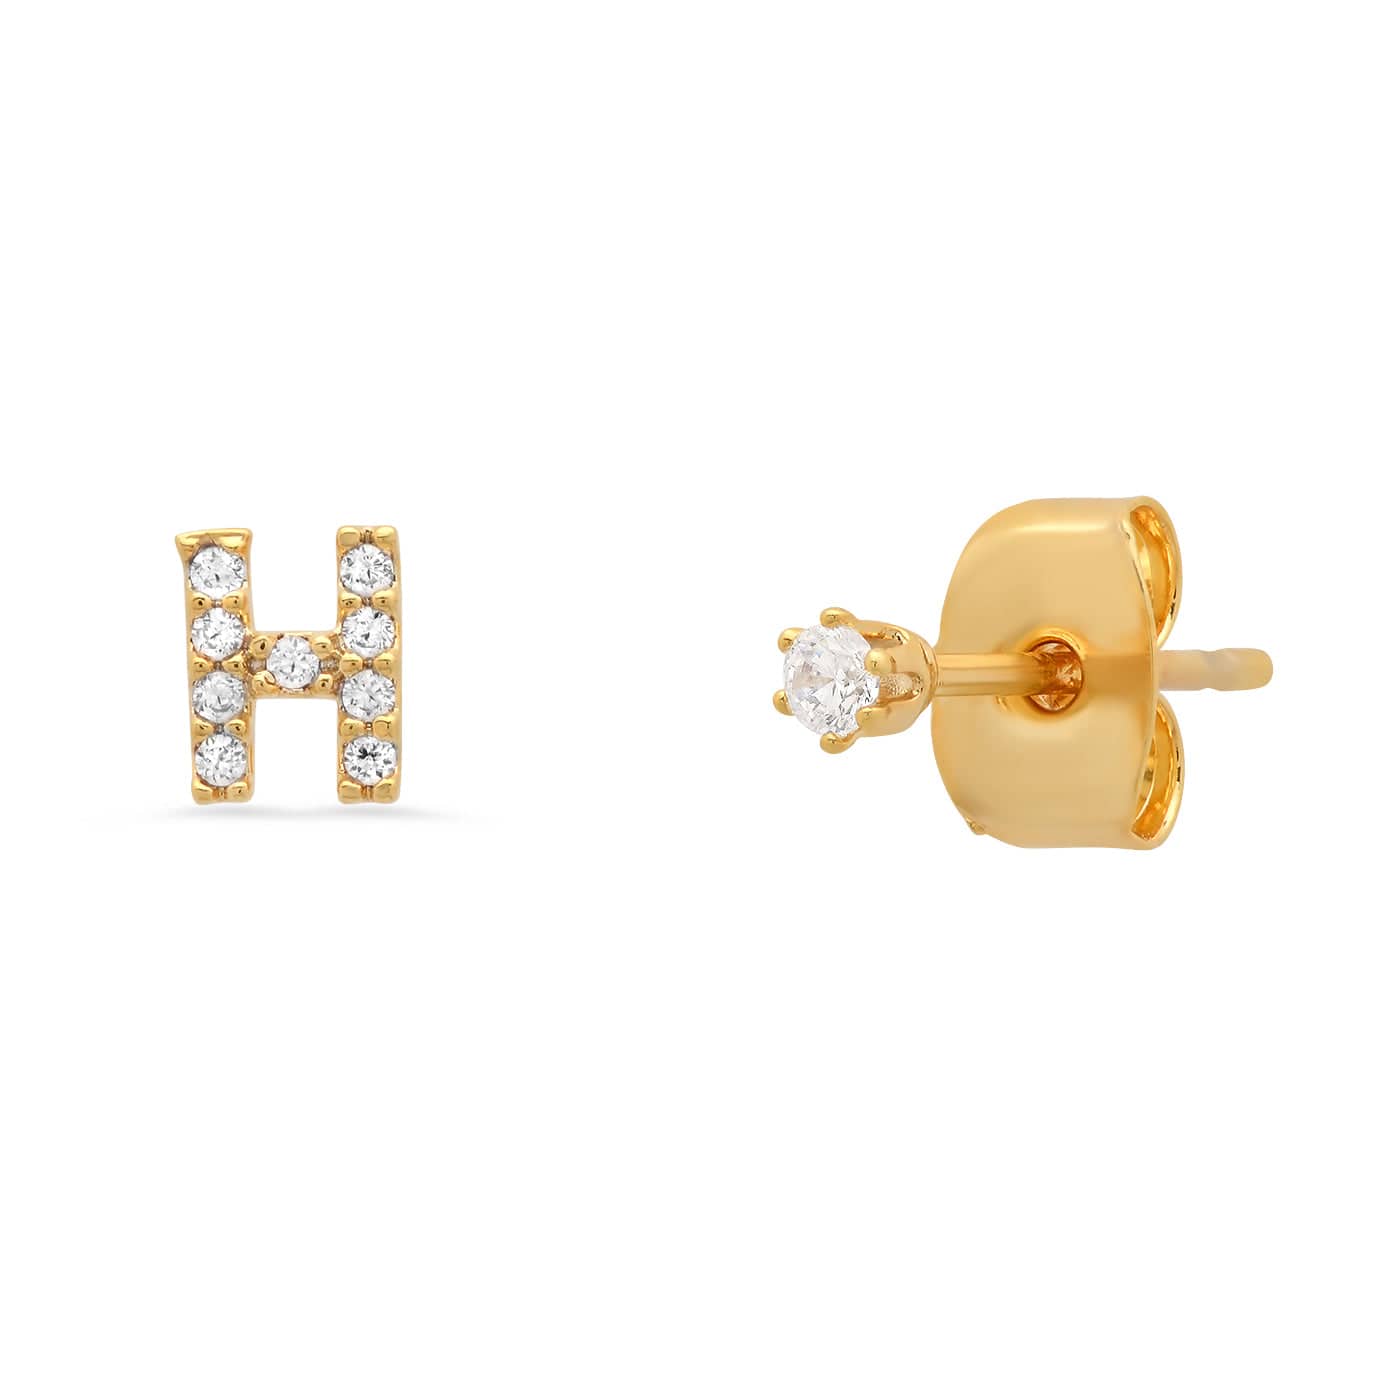 TAI JEWELRY Earrings Pavé Initial Mismatched Earrings